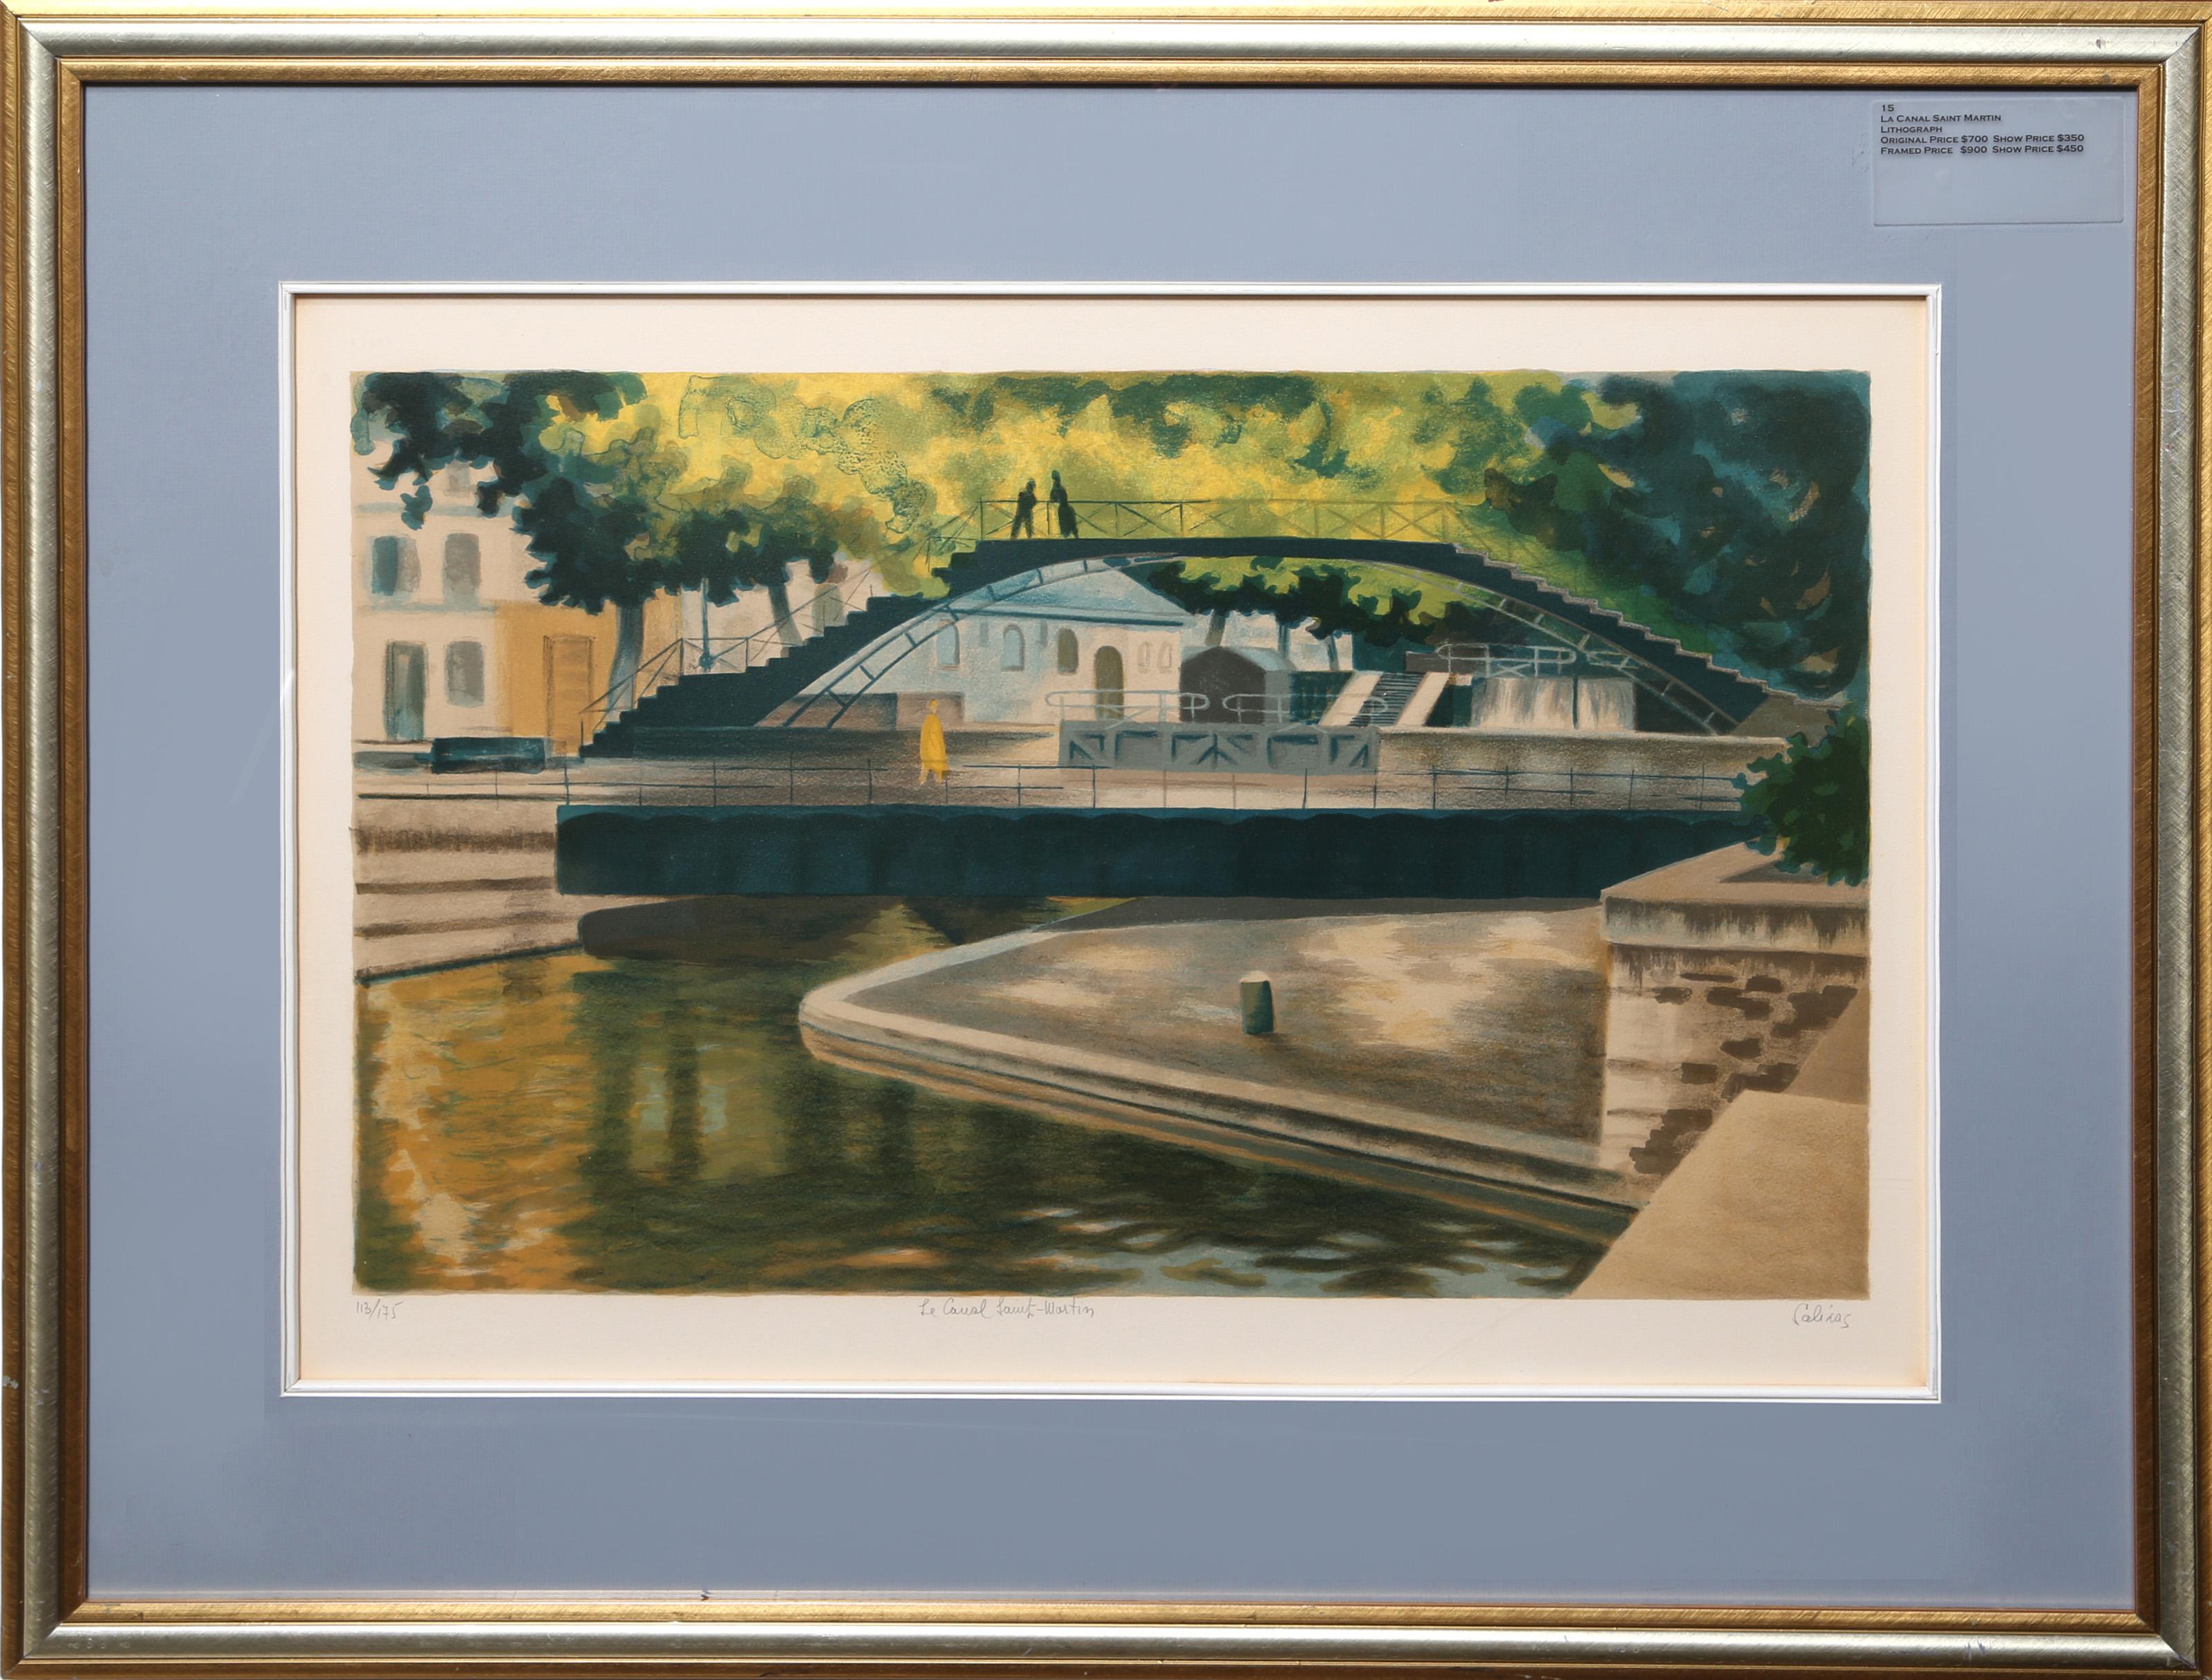 Laurent Marcel Salinas, Egyptian/French (1913 - 2010) -  La Canal Saint-Martin. Year: circa 1970, Medium: Lithograph, signed and numbered in pencil, Image Size: 15.5 x 25 inches, Size: 21 x 29 in. (53.34 x 73.66 cm), Frame Size: 28.5 x 36 inches 